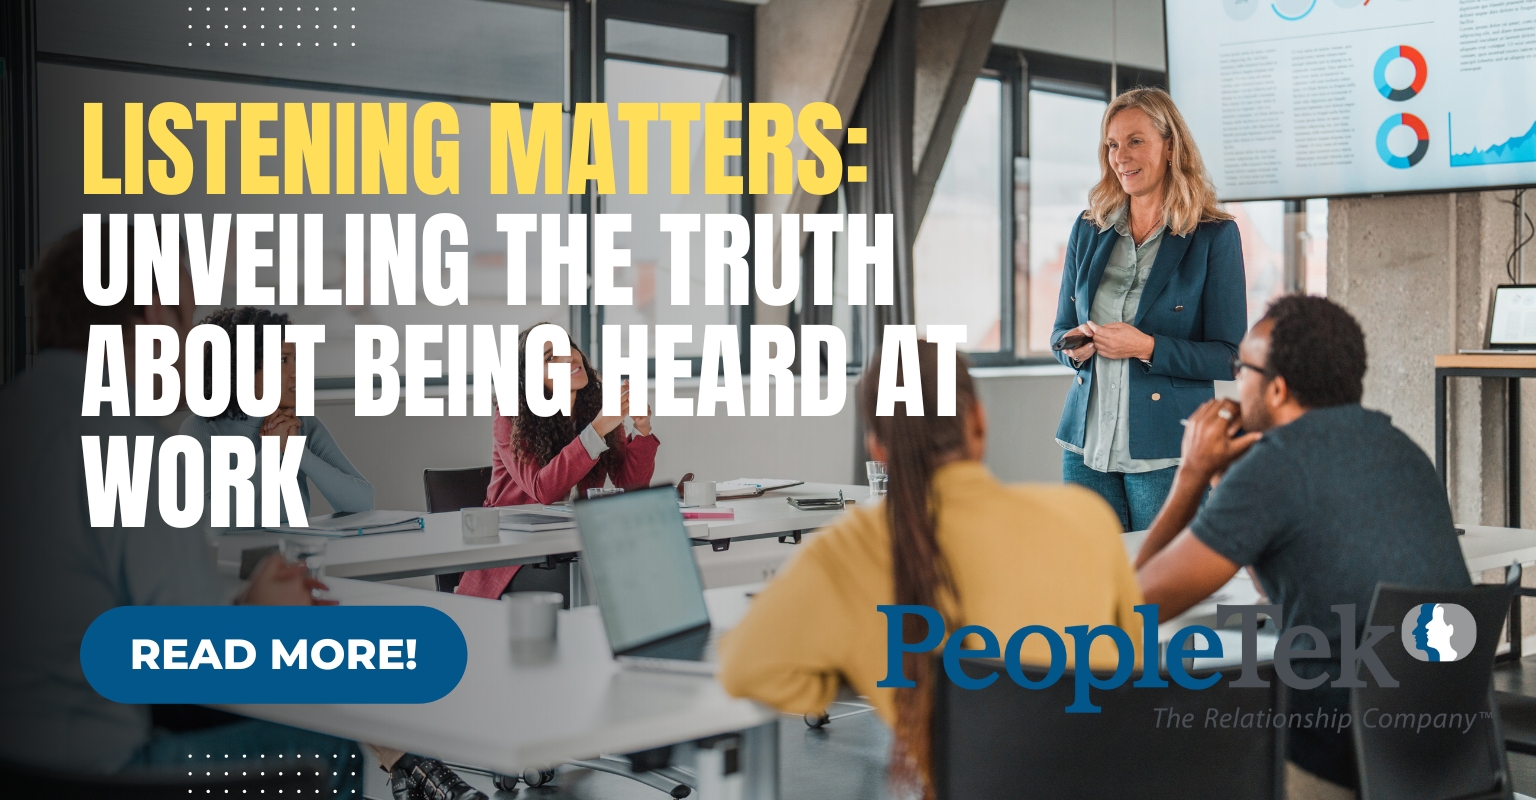 Listening Matters: Unveiling the Truth About Being Heard at Work